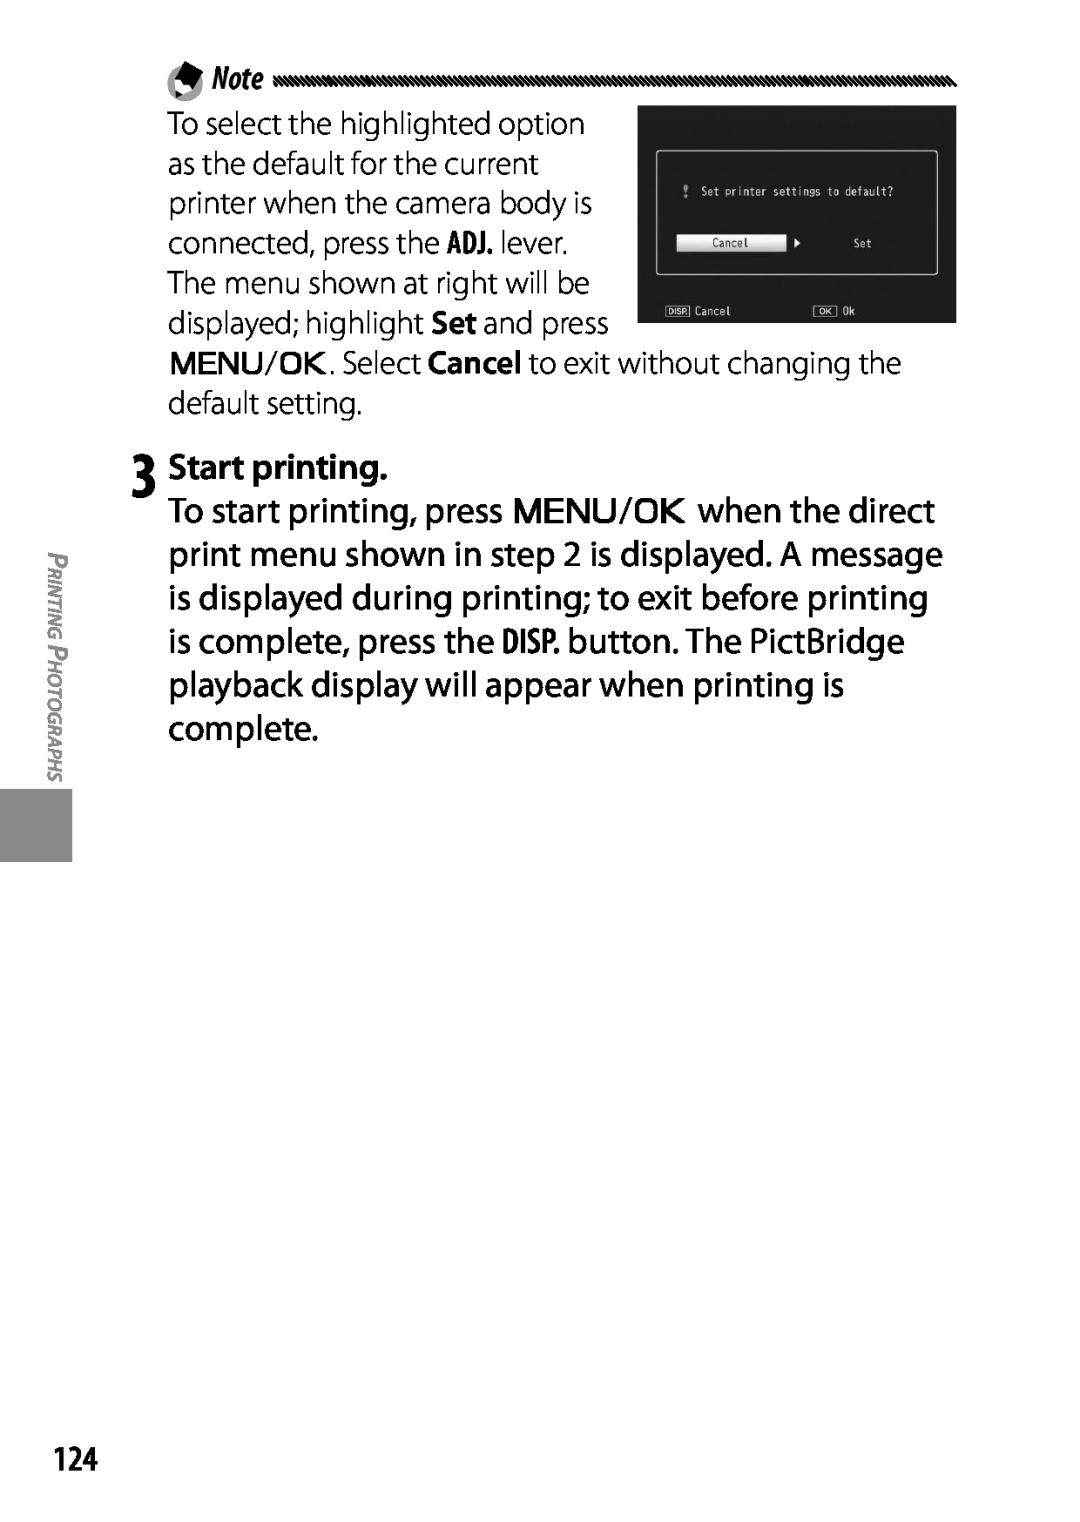 Ricoh 170543, GXR, 170553 manual 3 Start printing, C/D. Select Cancel to exit without changing the default setting 